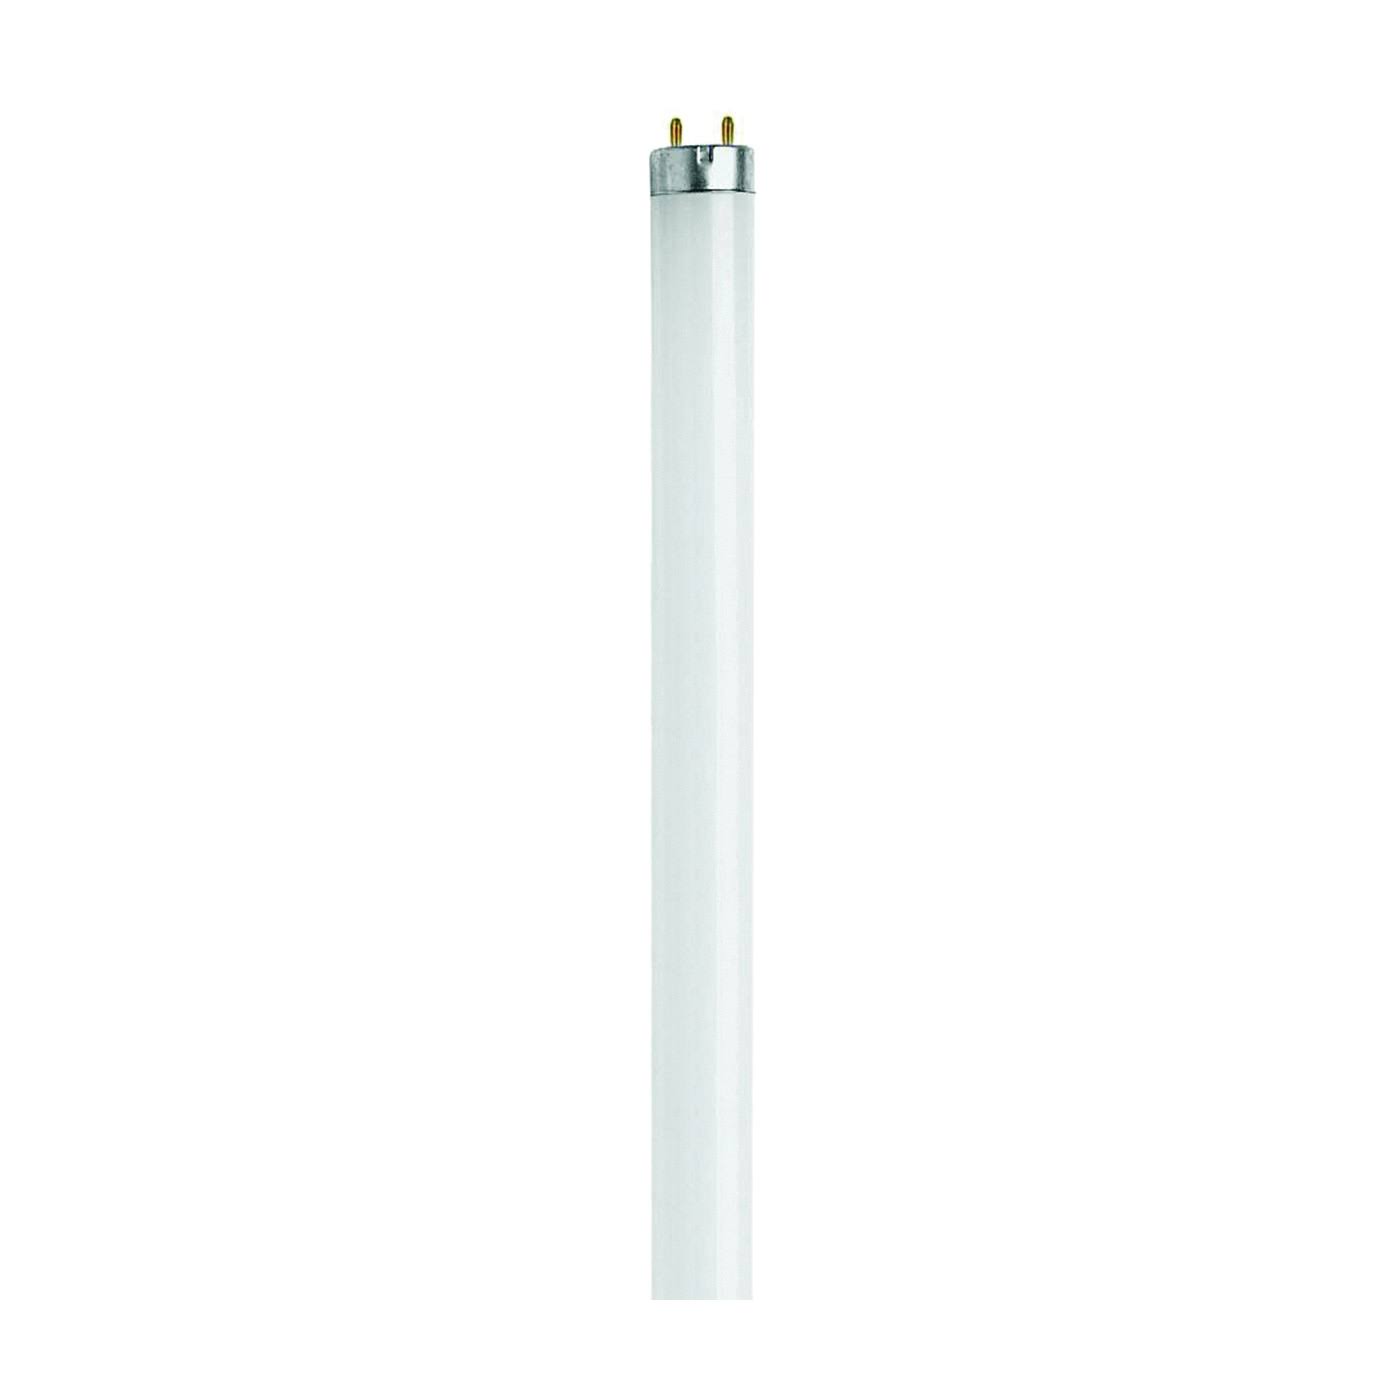 Feit Electric Lamp Fluorescent T12 30W 36in